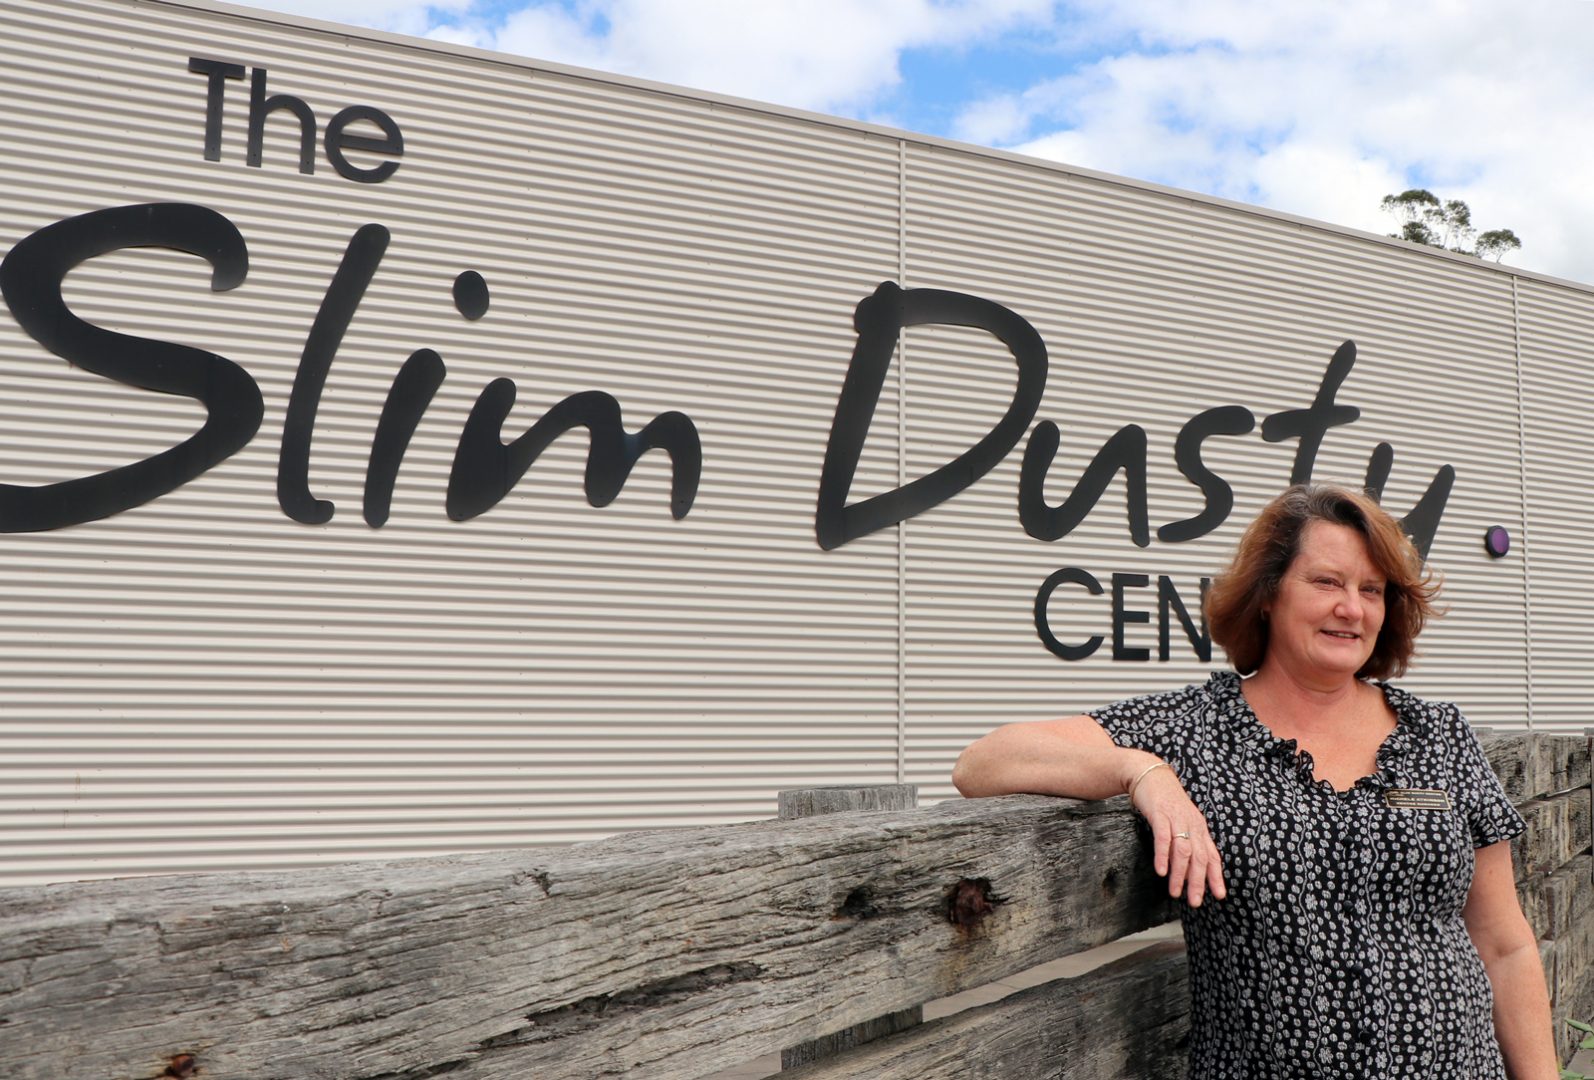 Michele at the Slim Dusty Centre